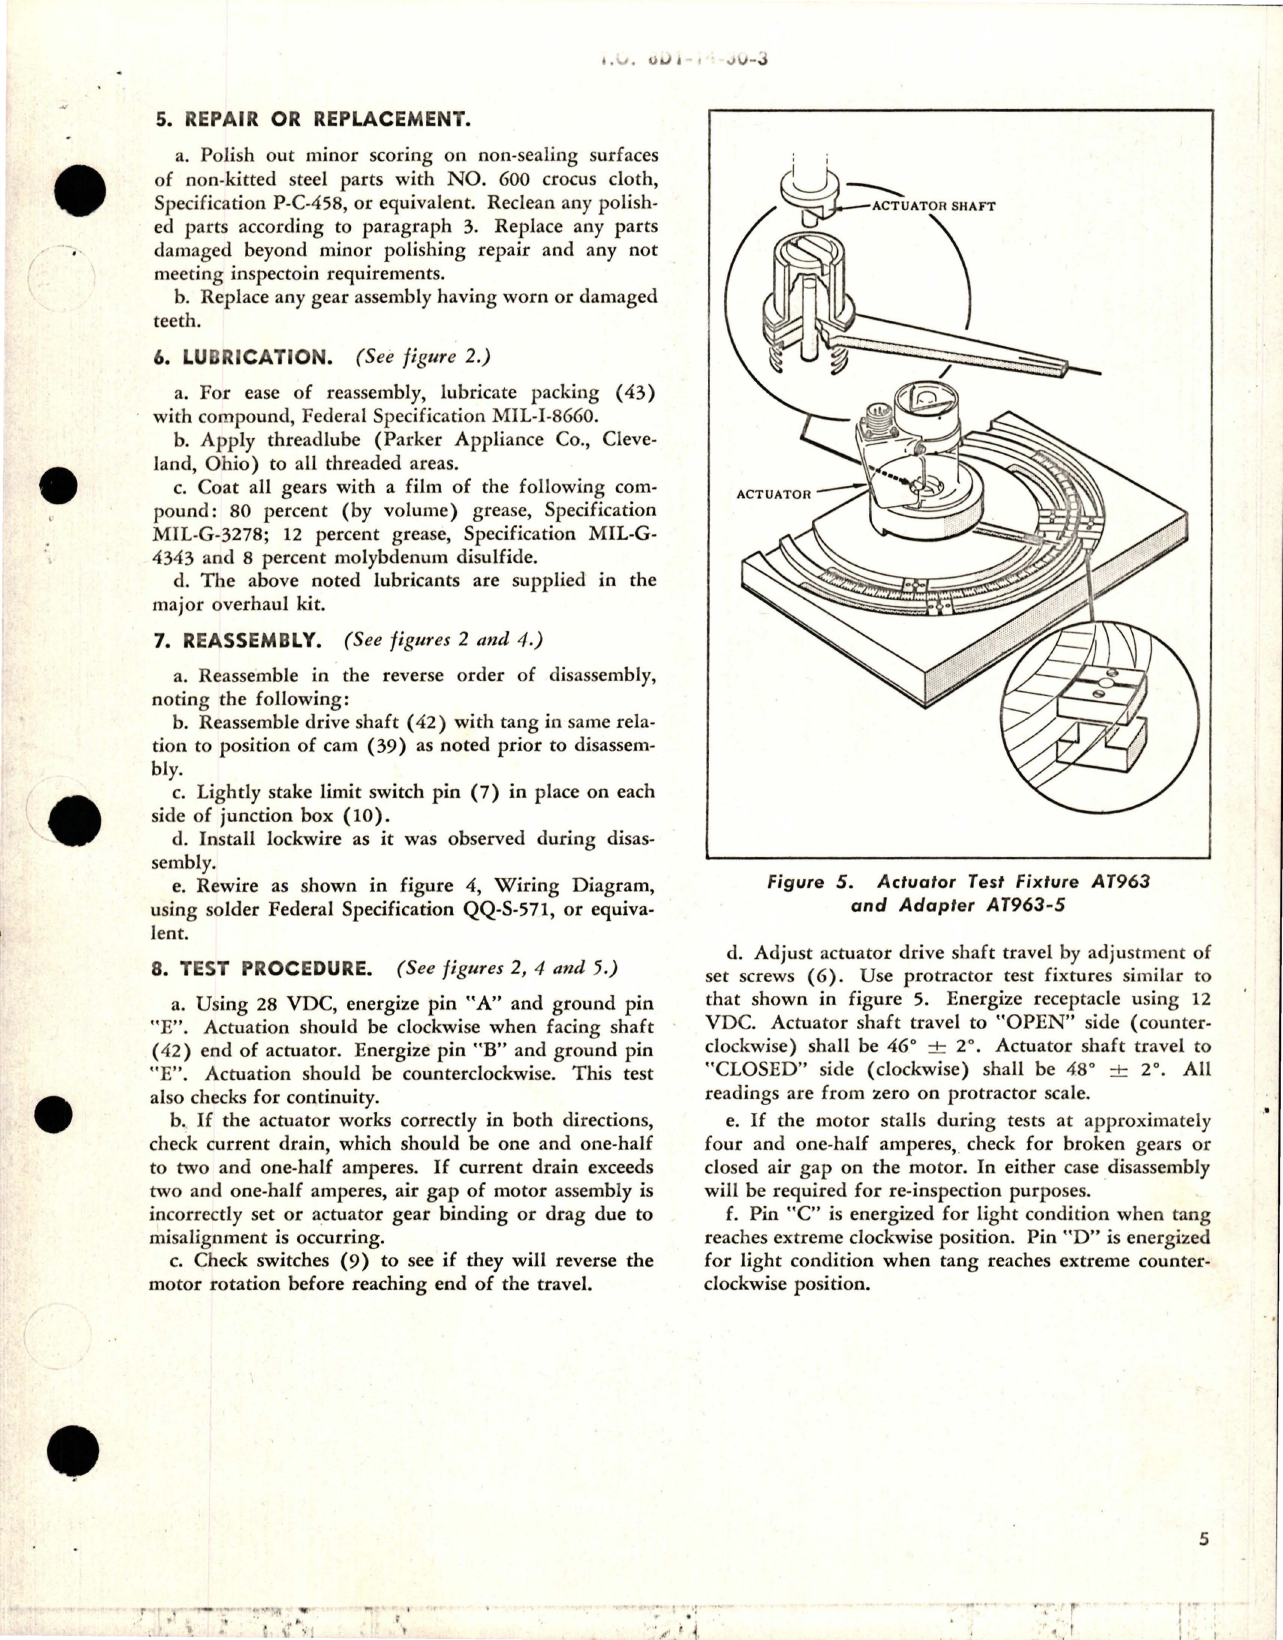 Sample page 5 from AirCorps Library document: Overhaul with Parts Breakdown for Series Motor Actuator Assembly - Part 109451